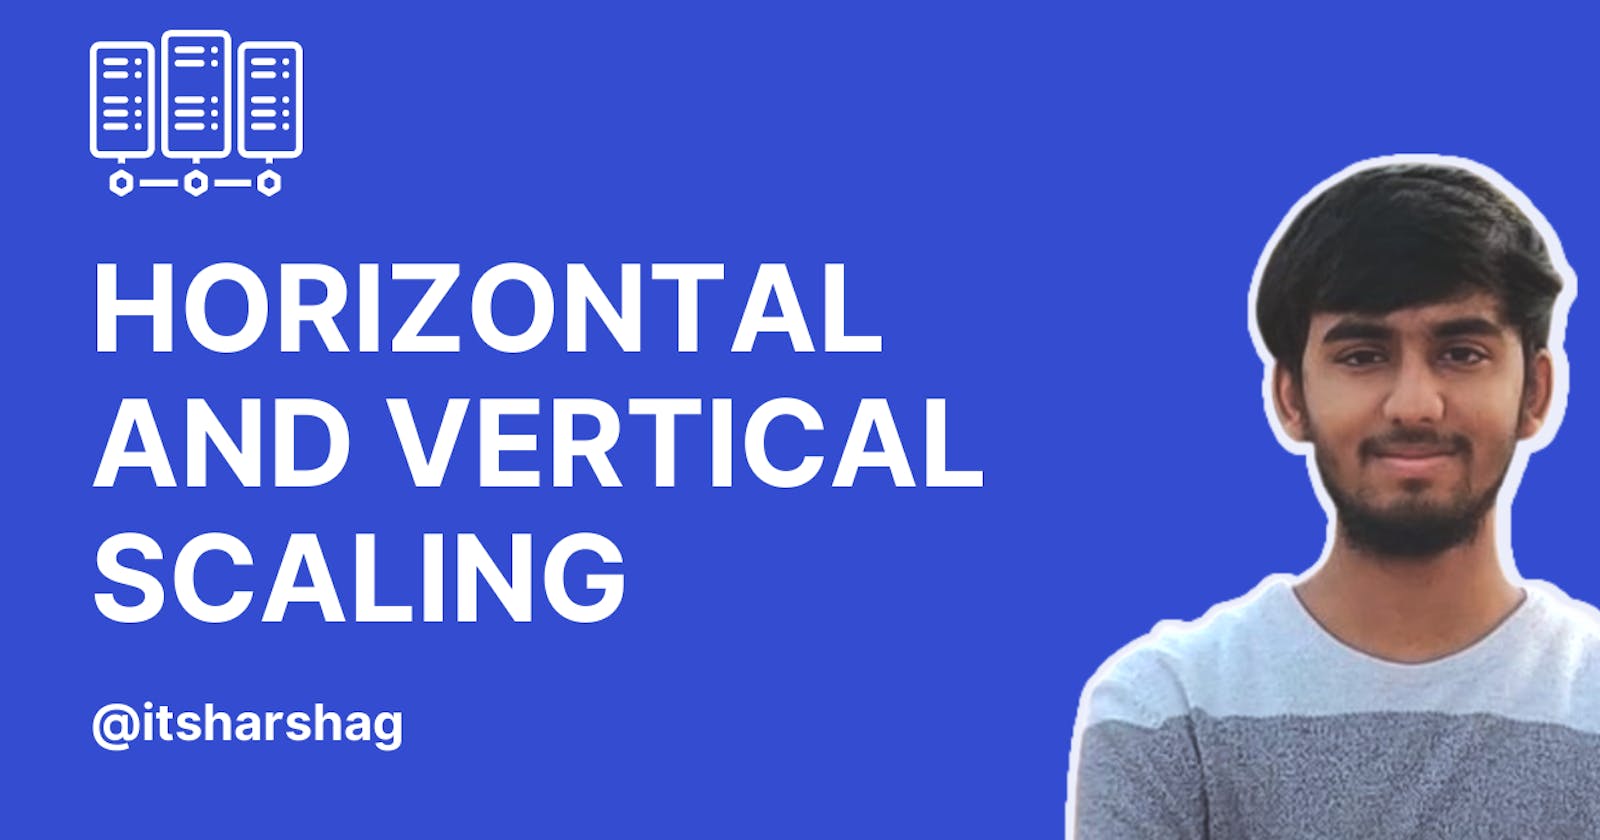 Horizontal and Vertical Scaling